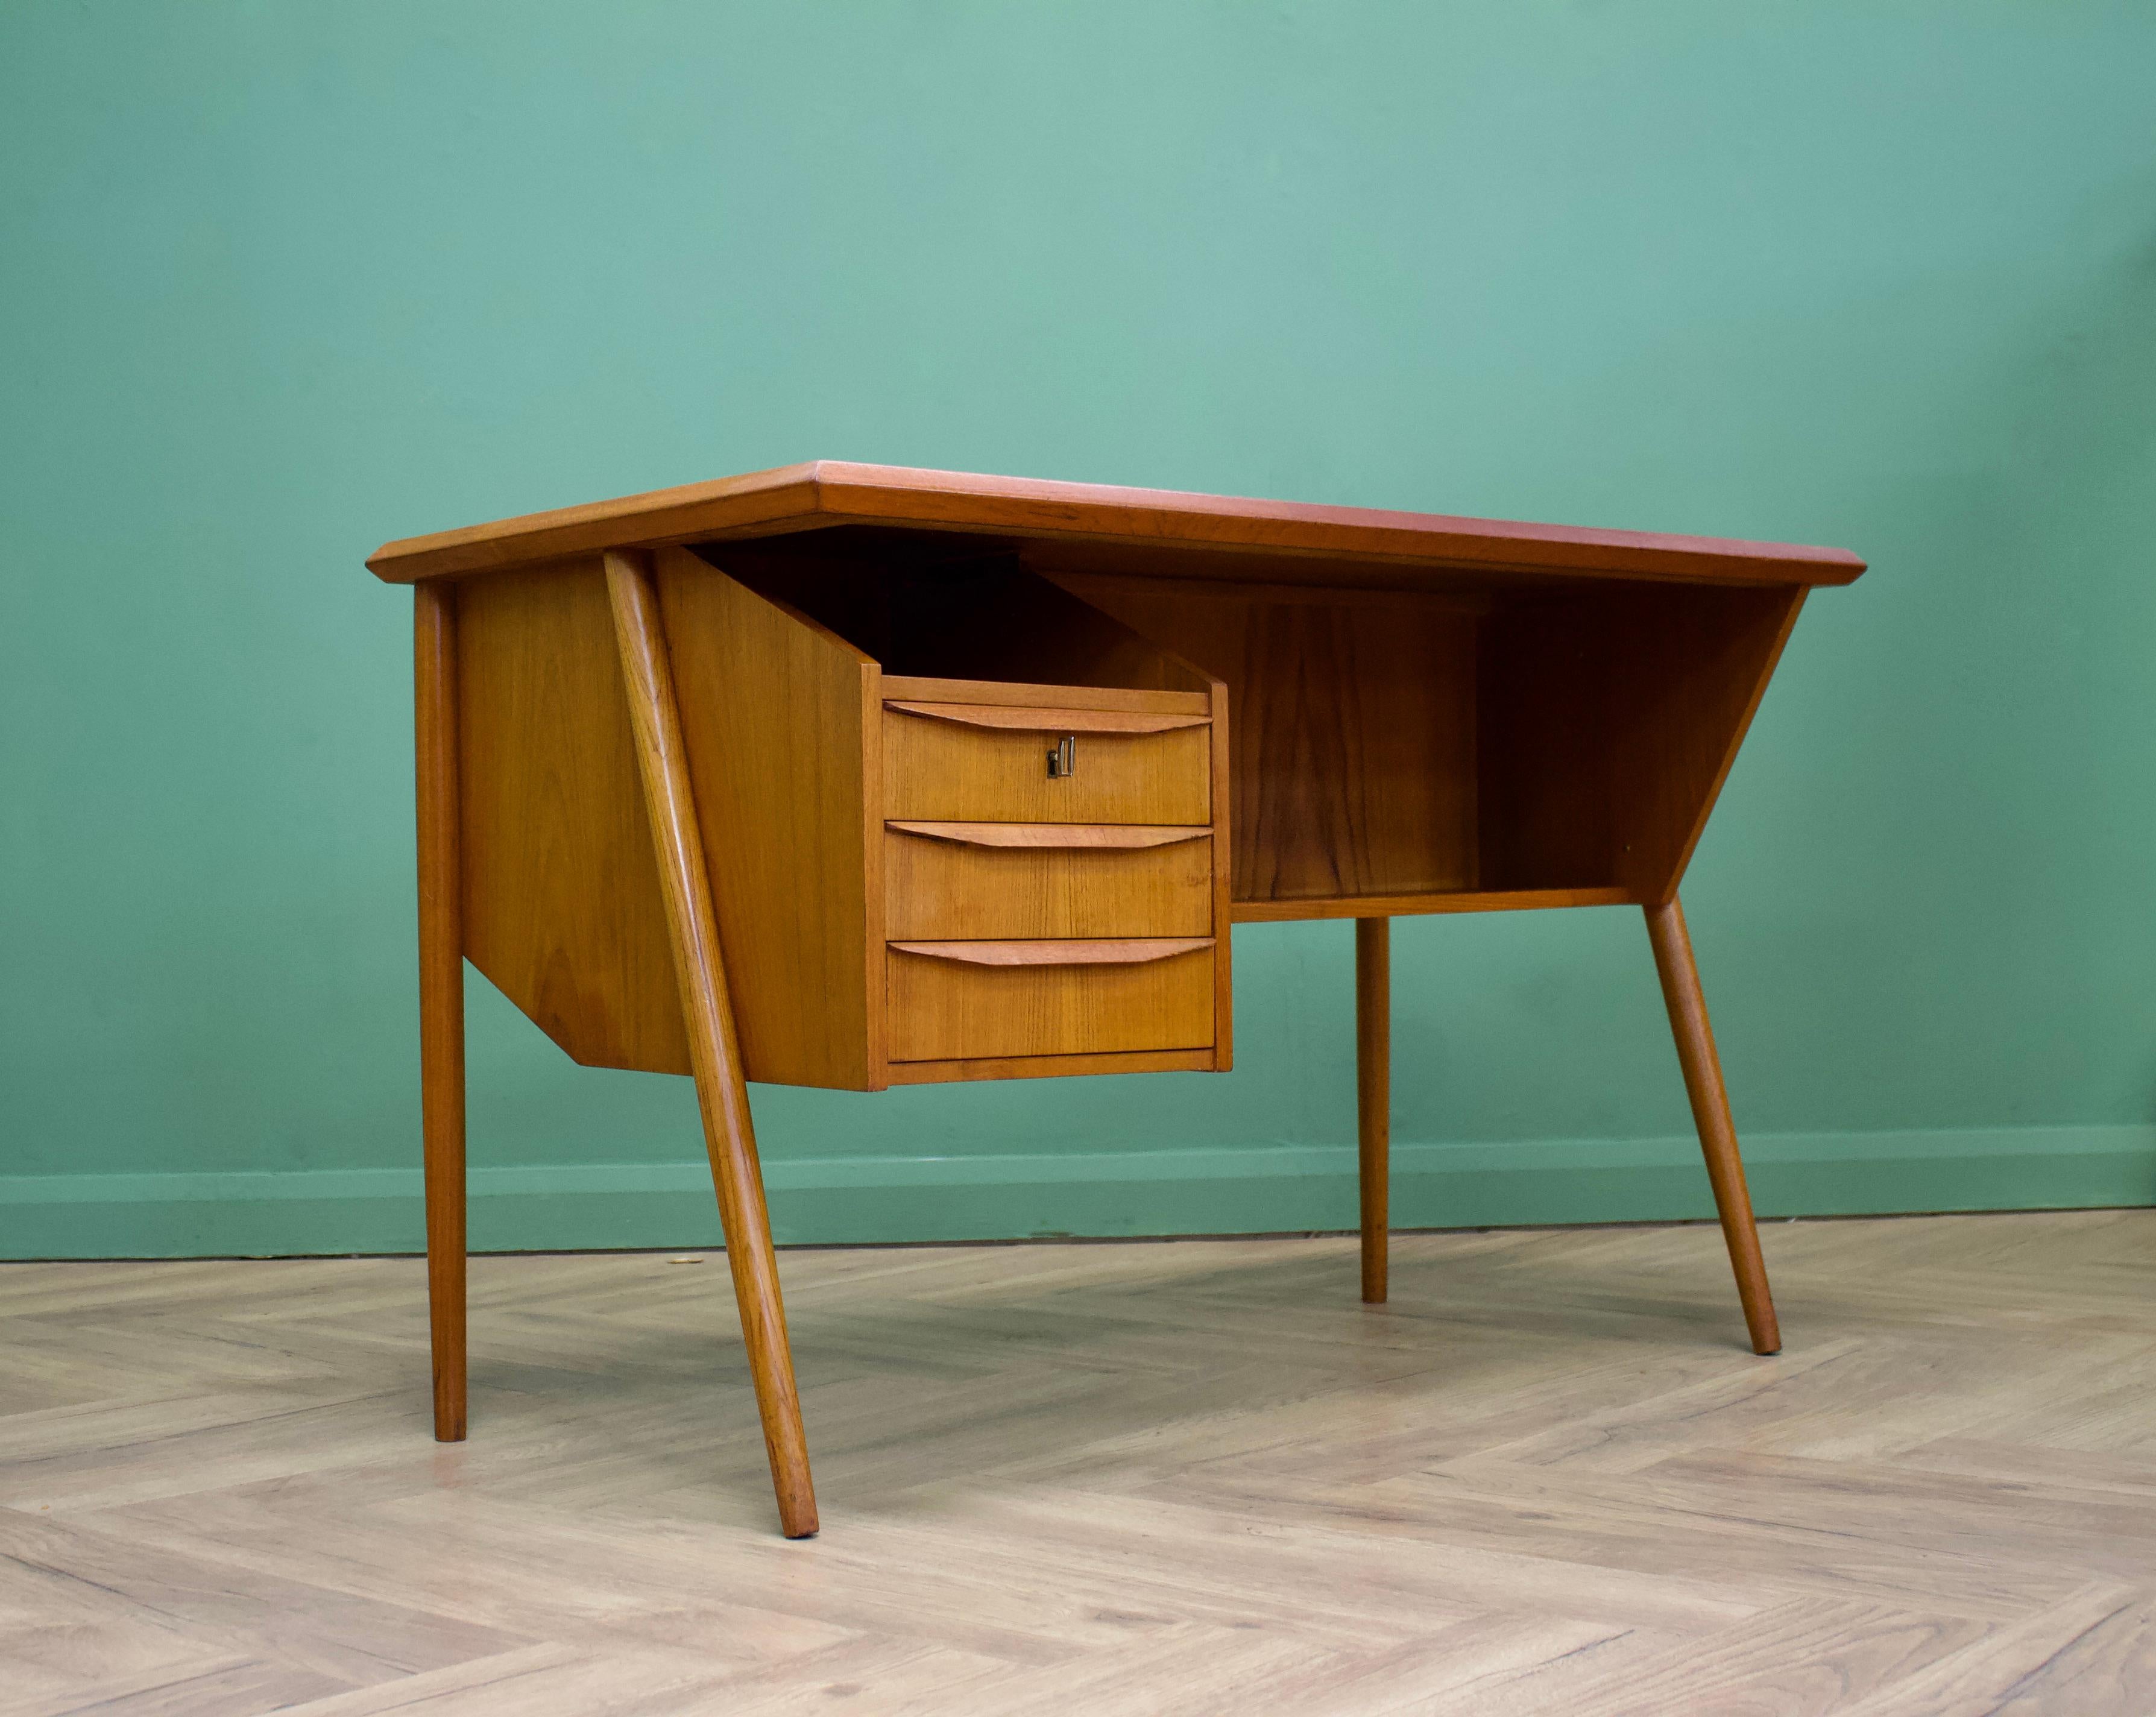 A compact Danish teak desk from Tibergaard.
Featuring a floating top design -3 drawers, shelves to the front and a bookshelf to the back.